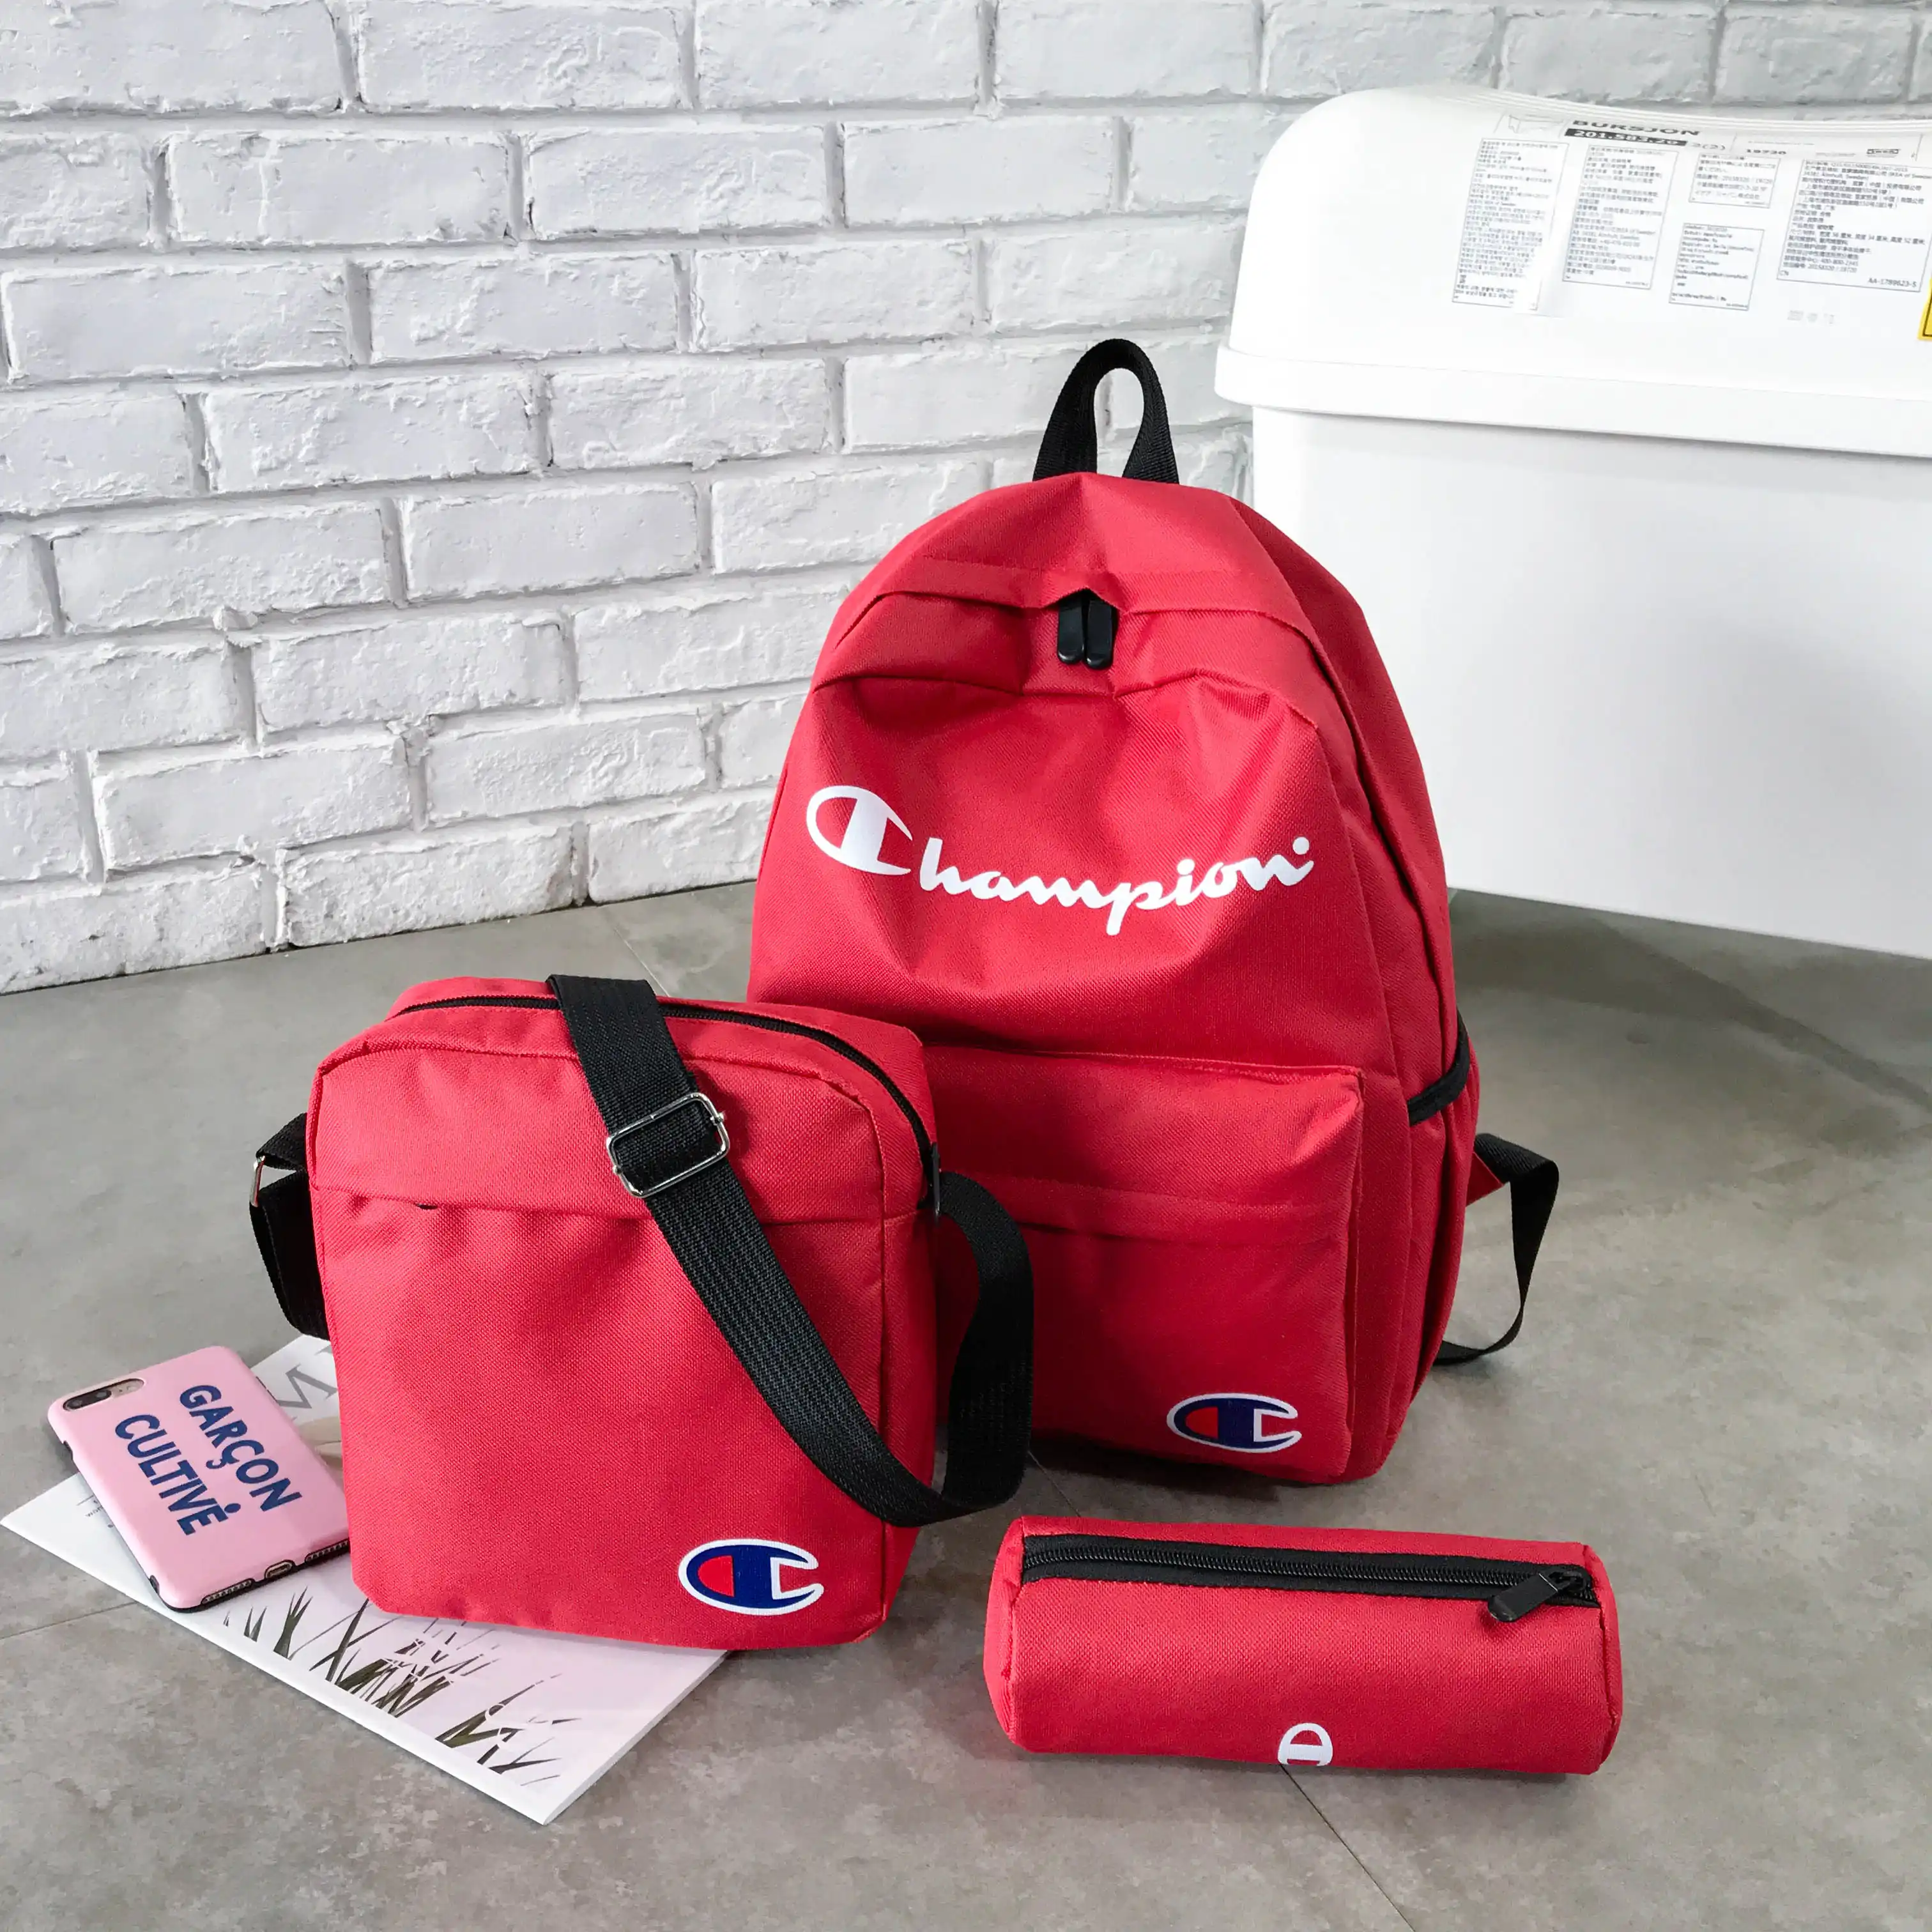 champion backpack 2018